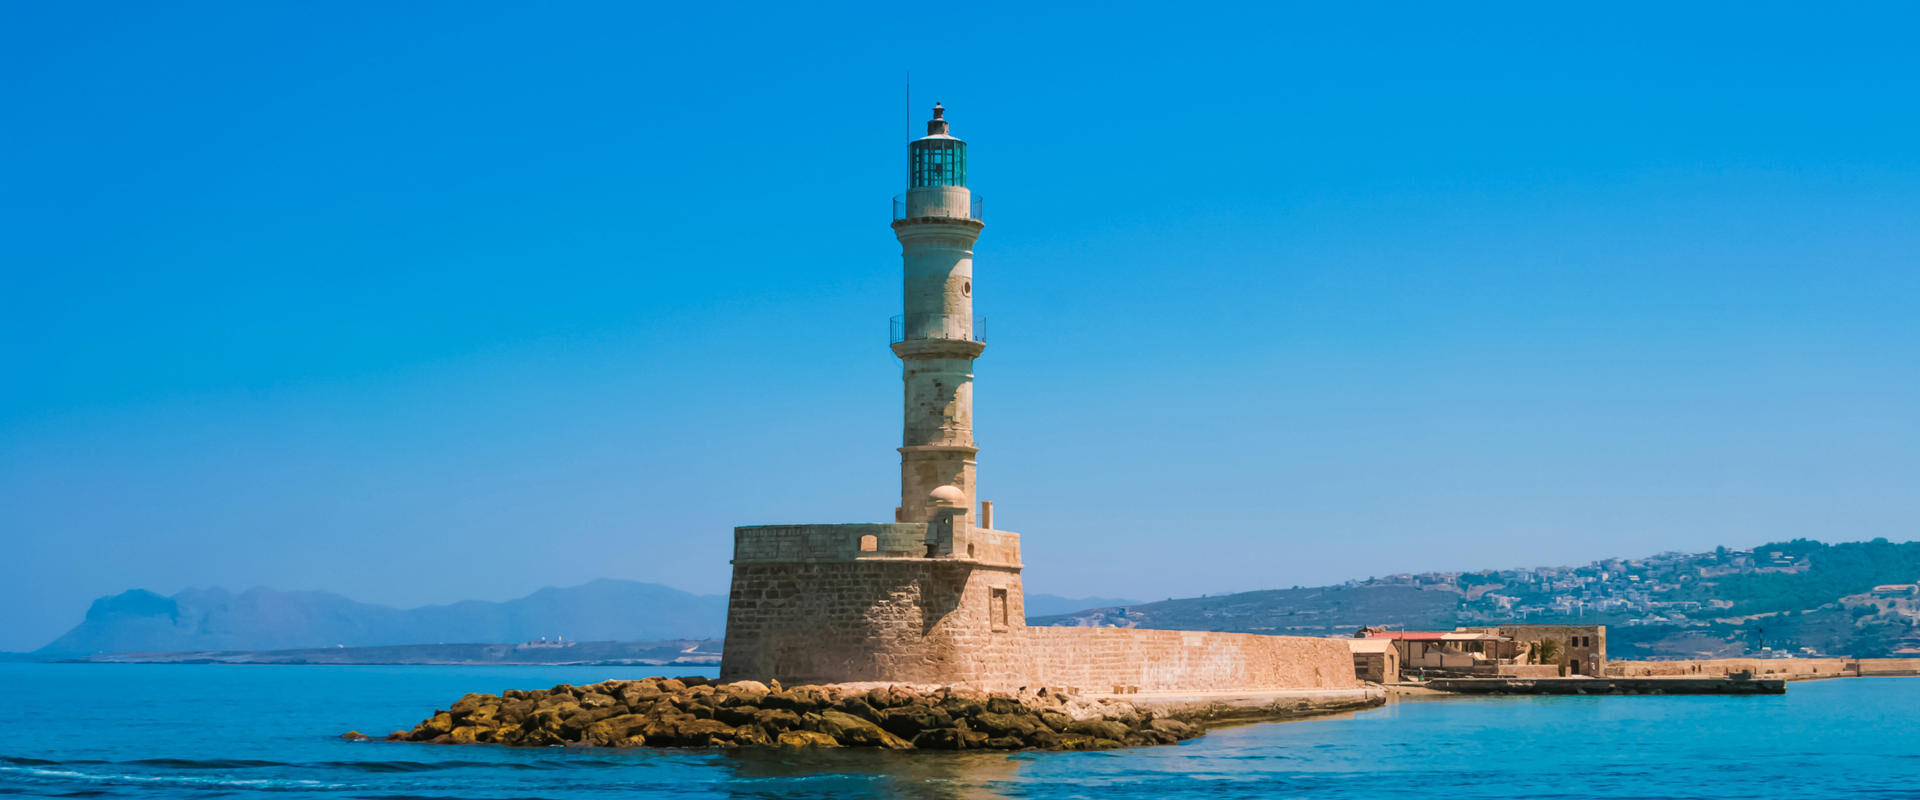 Lighthouse in Chania on island of Crete